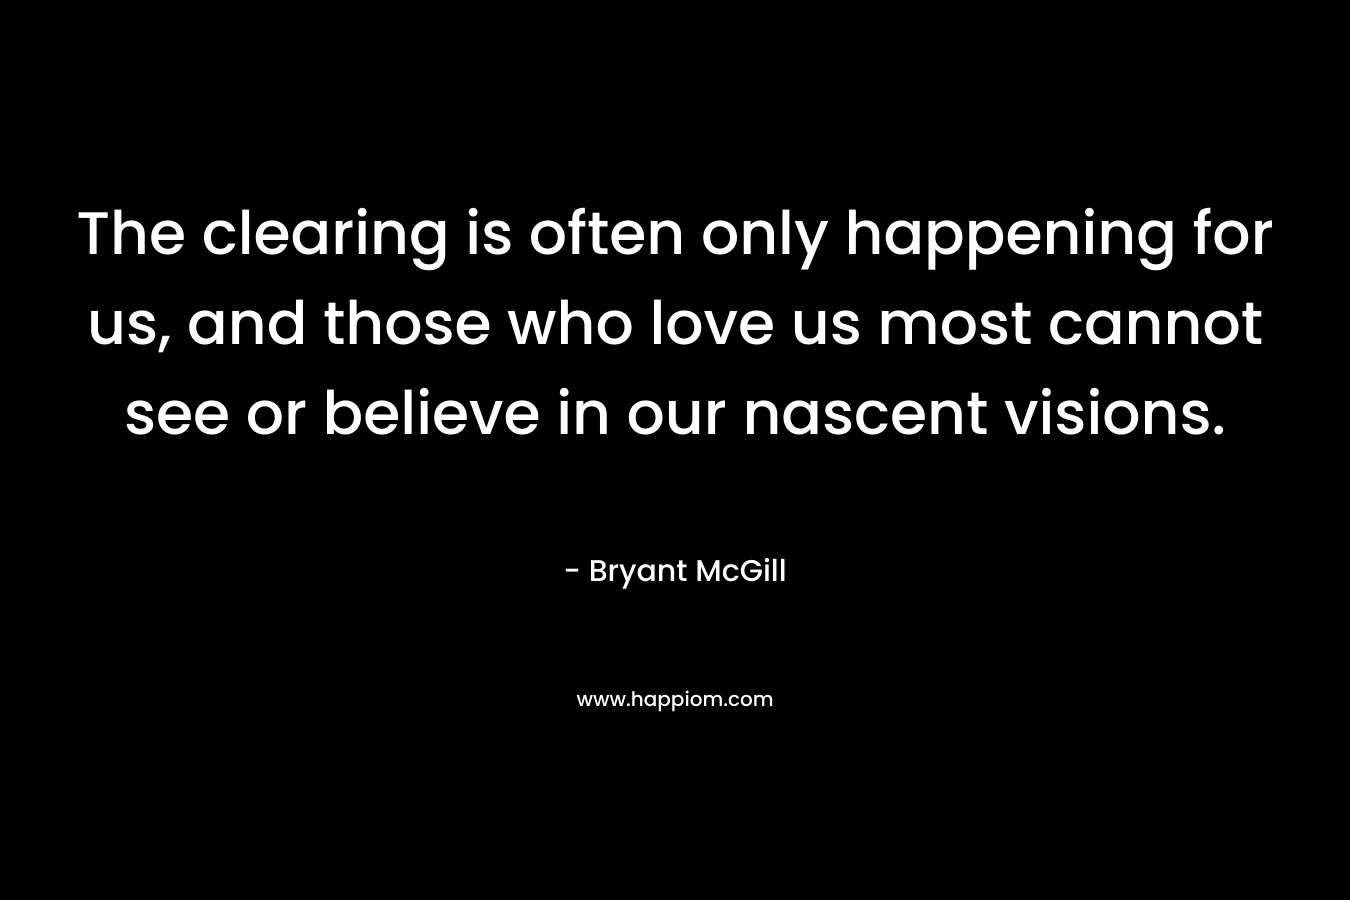 The clearing is often only happening for us, and those who love us most cannot see or believe in our nascent visions. – Bryant McGill